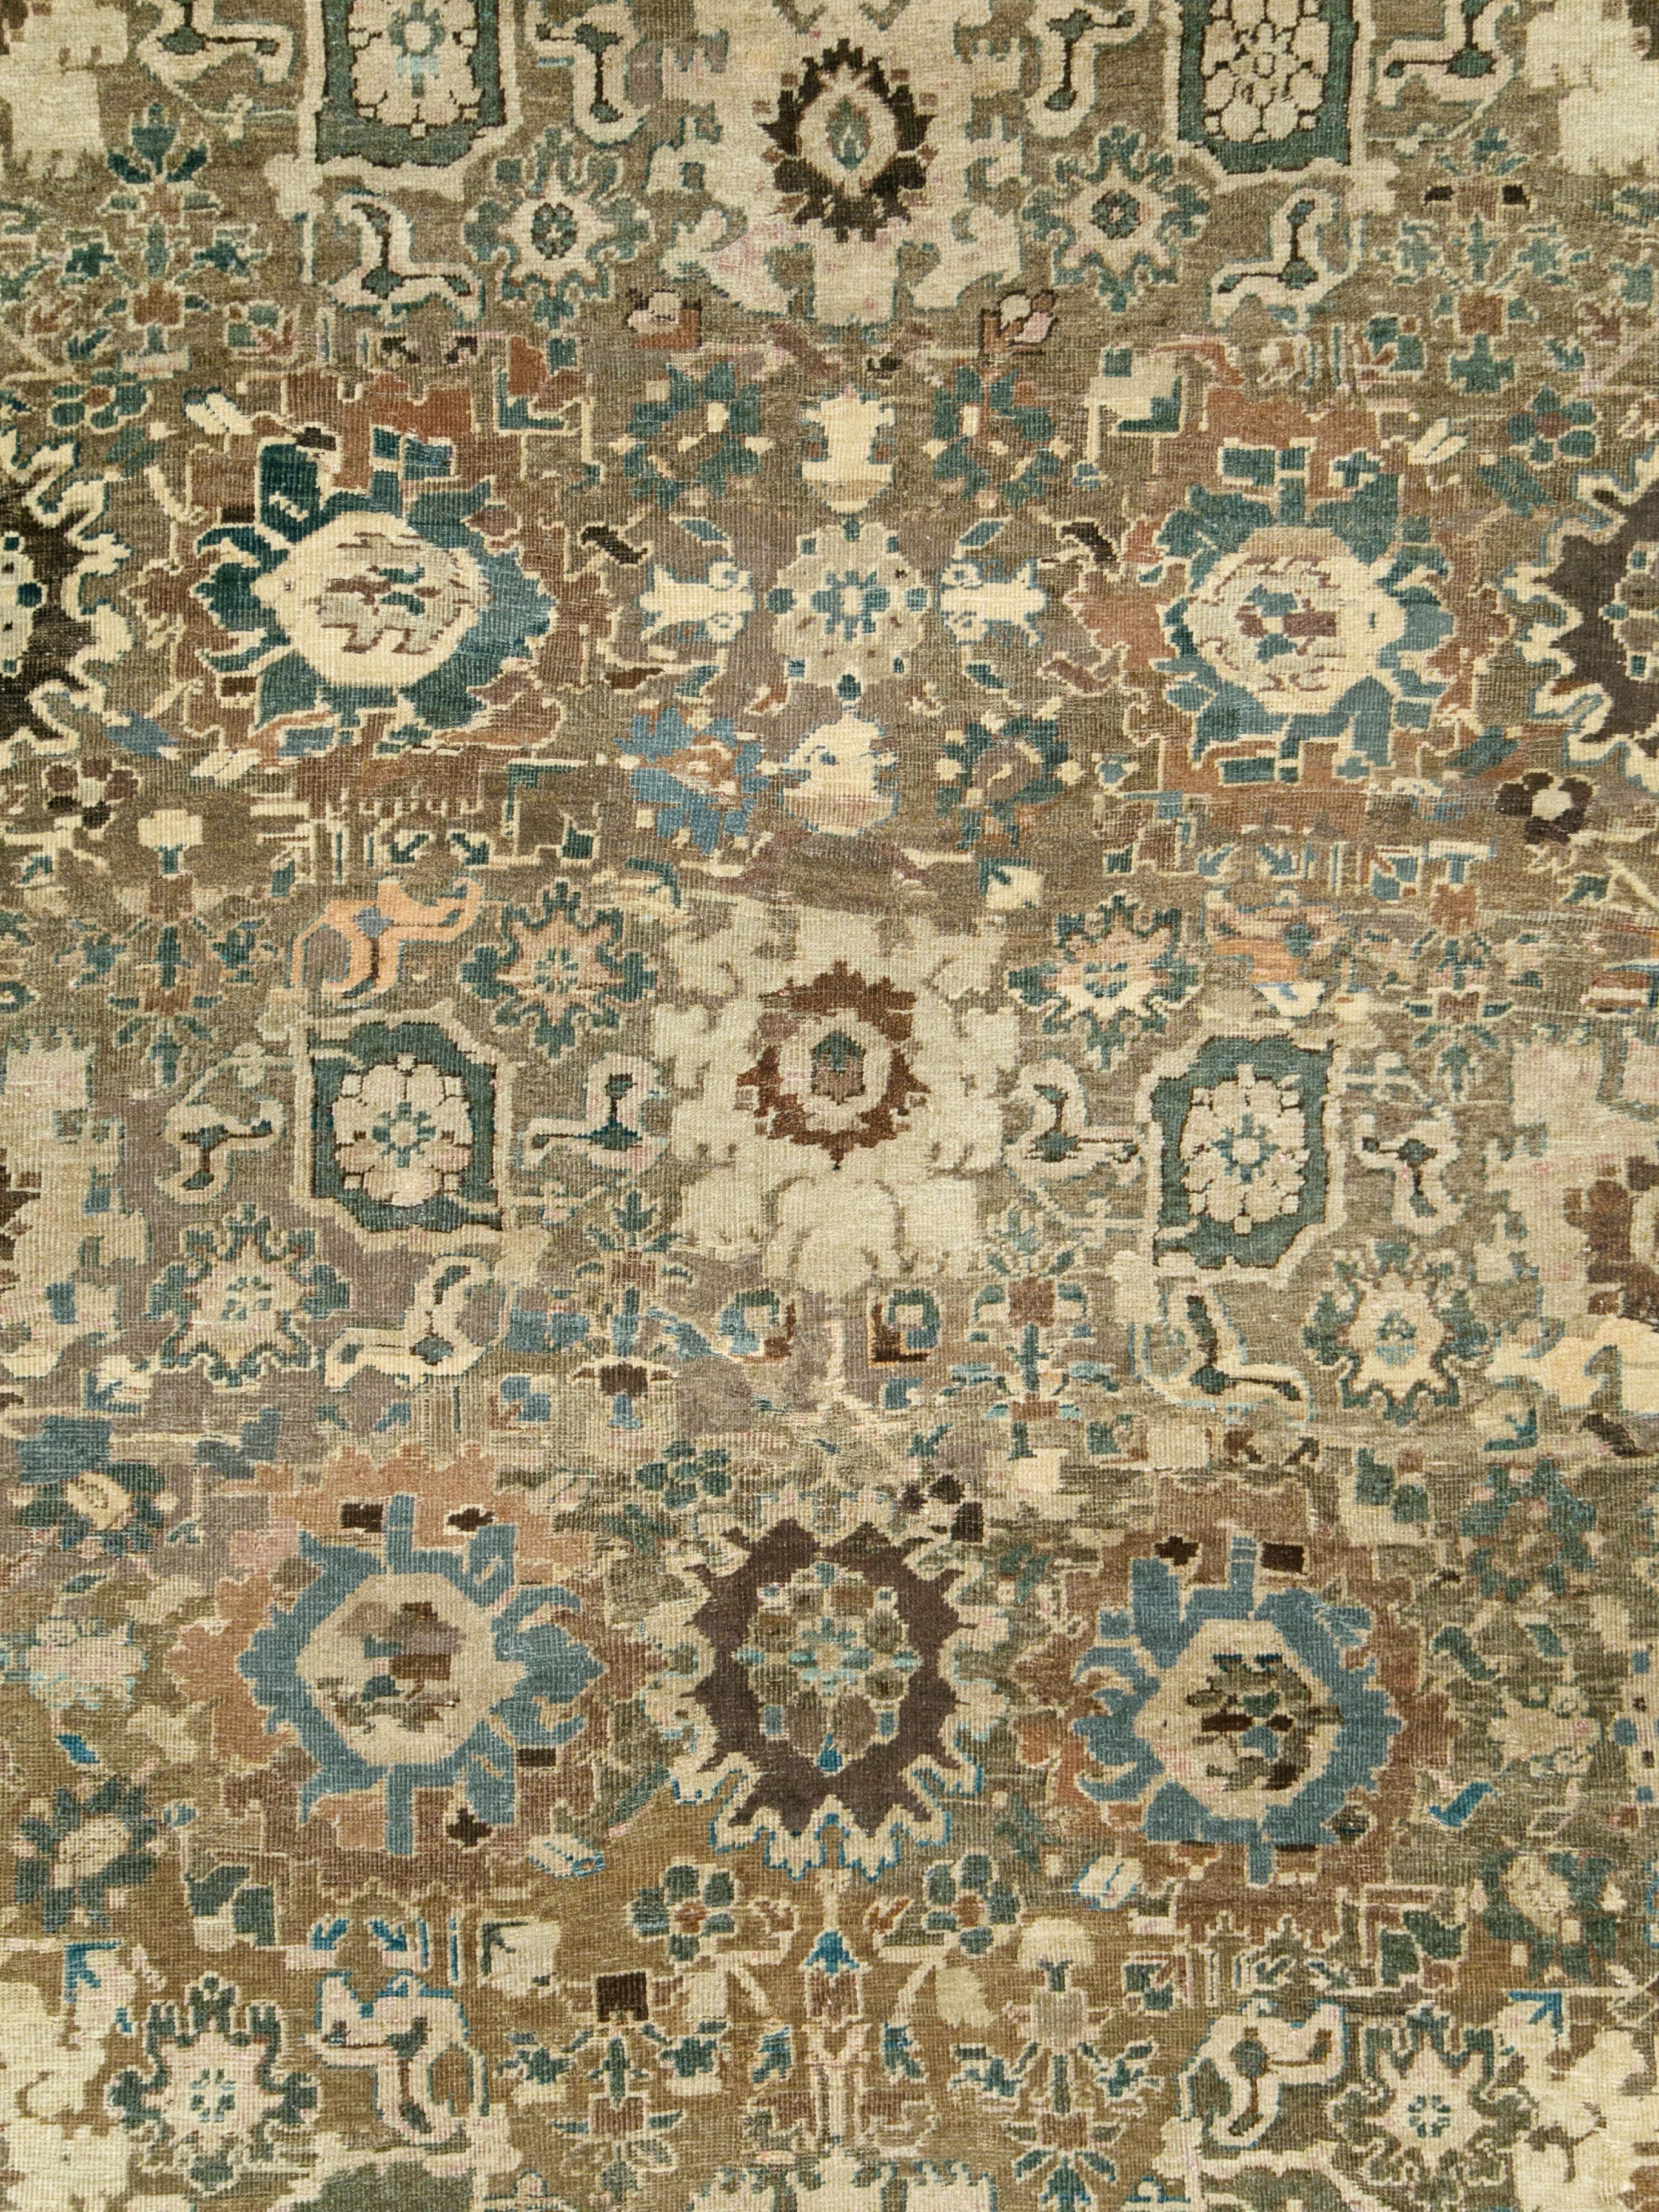 An antique Persian Mahal carpet from the early 20th century with the Classic Persian Harshang (crab) pattern of ragged palmettes, fringed rosettes, oblique ellipses, and flower arrays, all detailed in ivory and slate. The abrashed (natural color